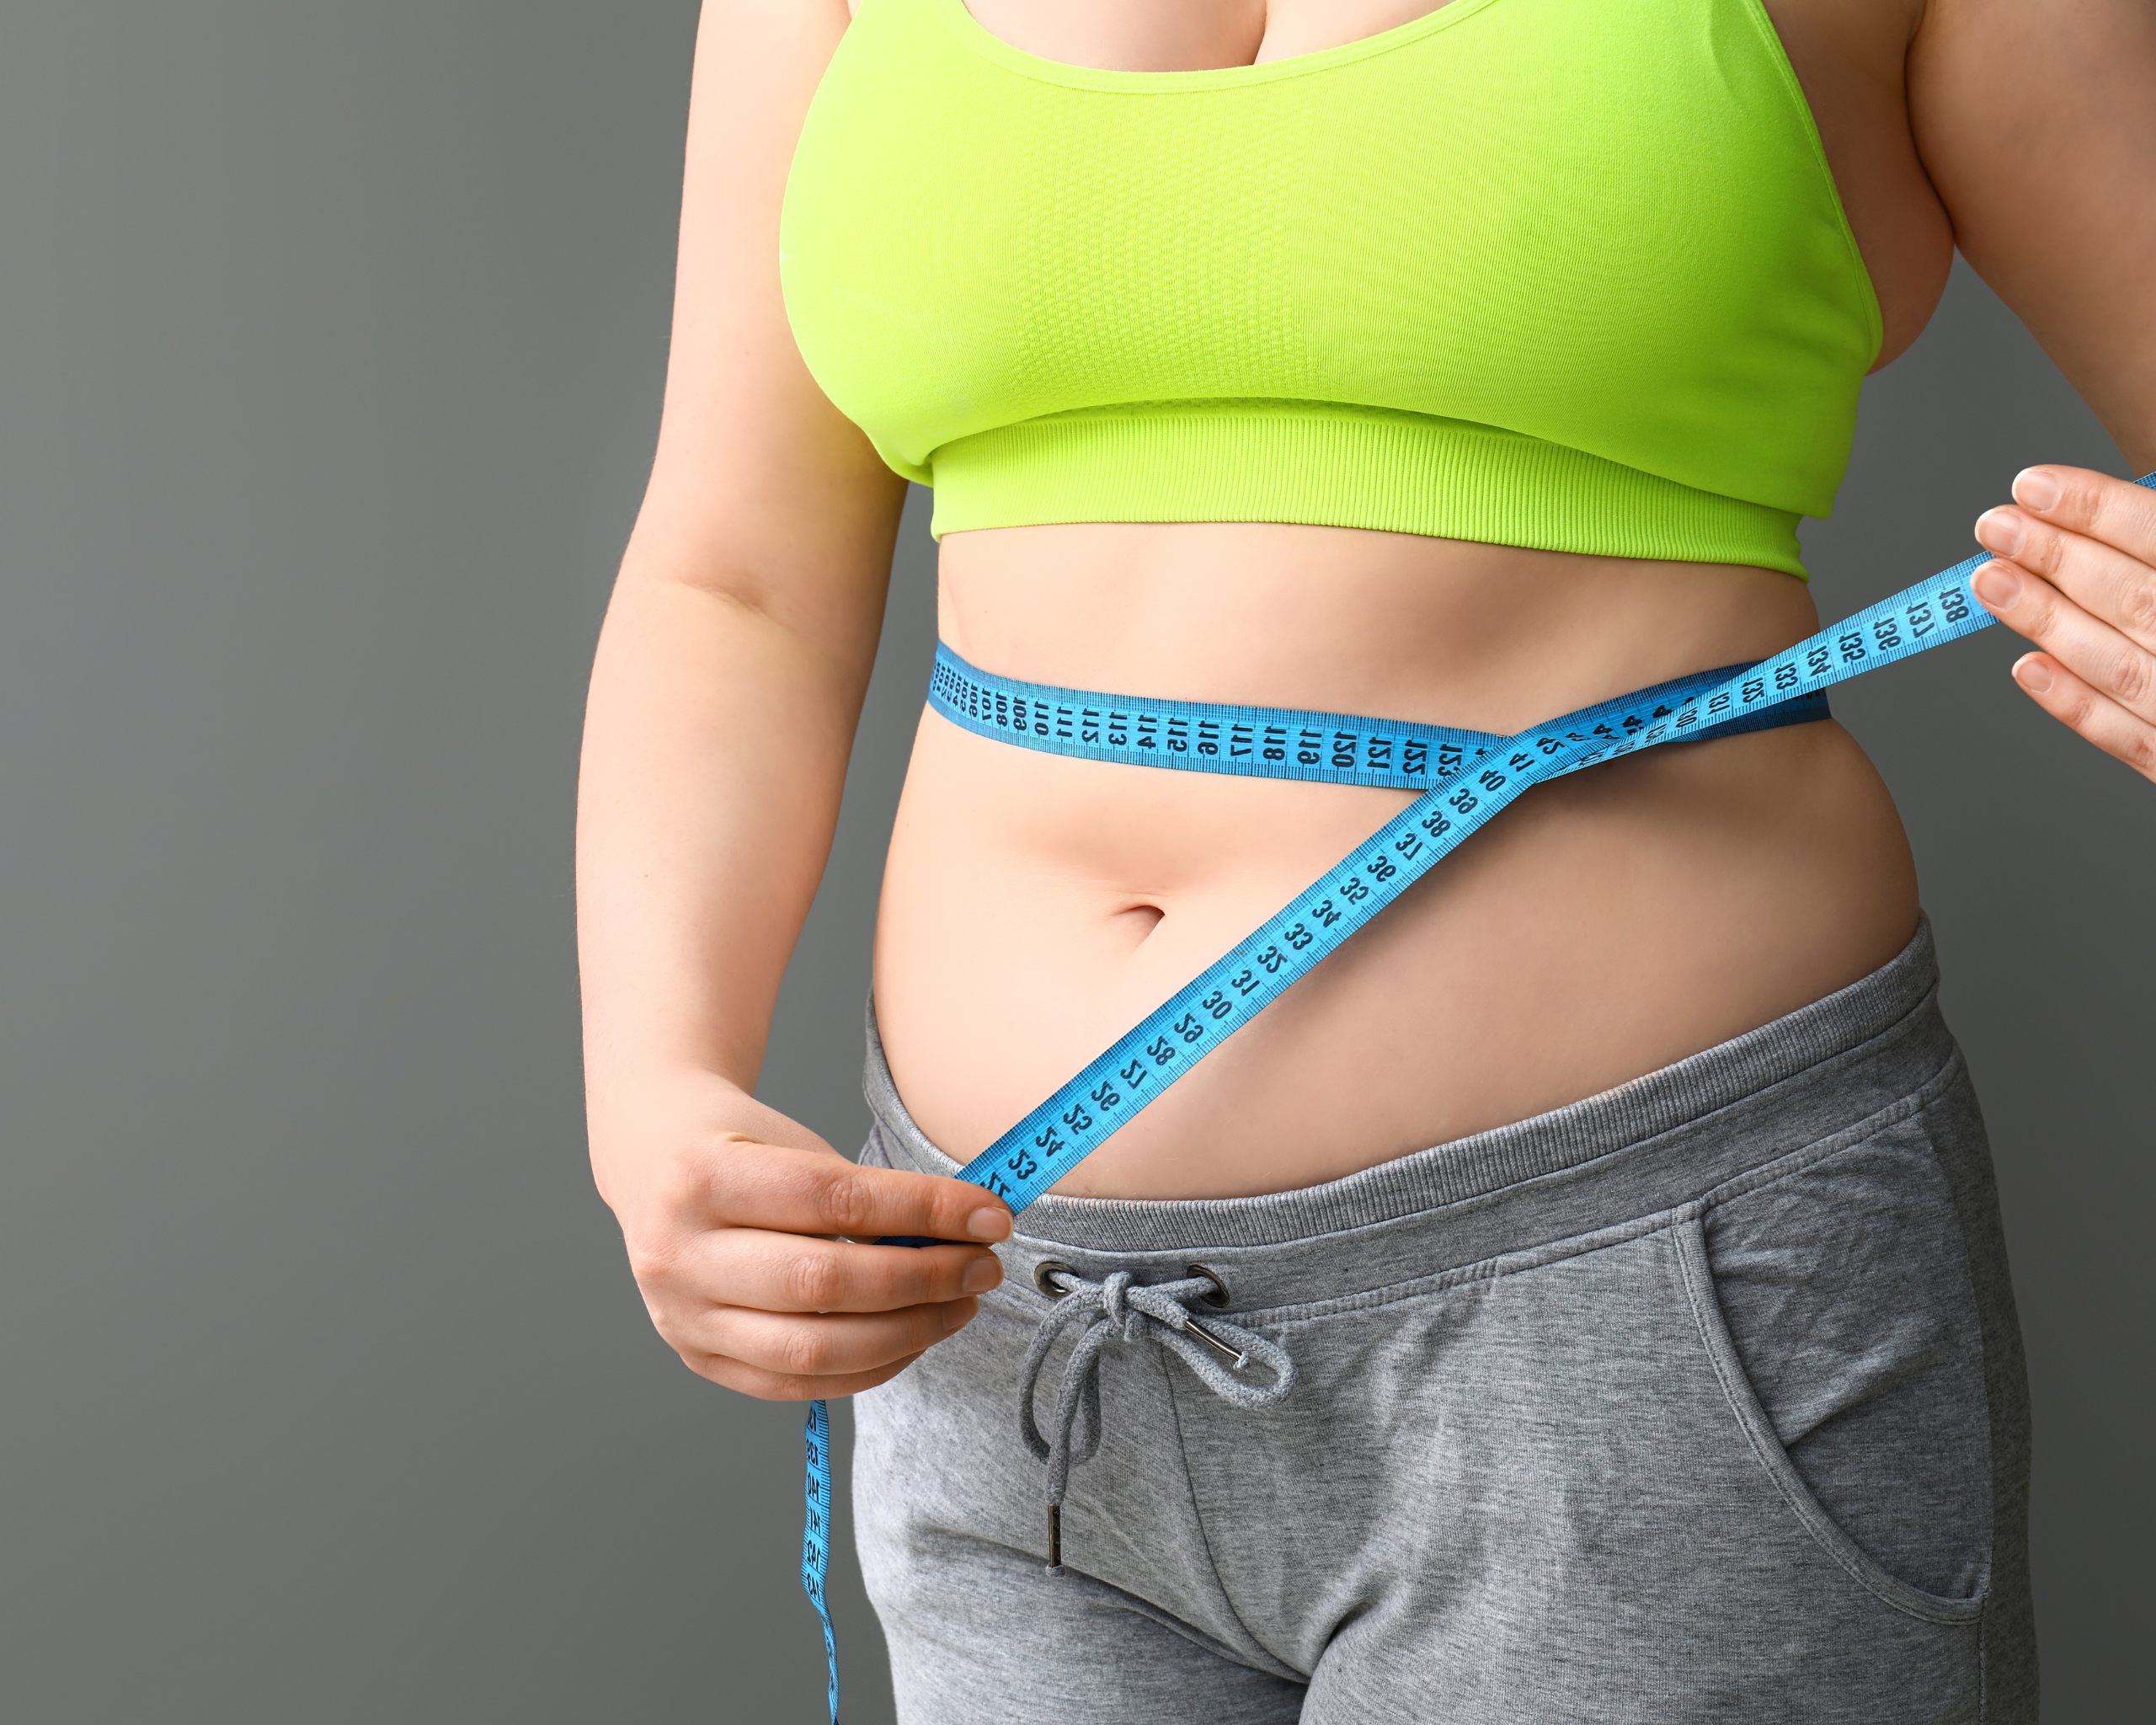 Weight loss clinic in Cary, NC Semaglutide and Tirzepatide